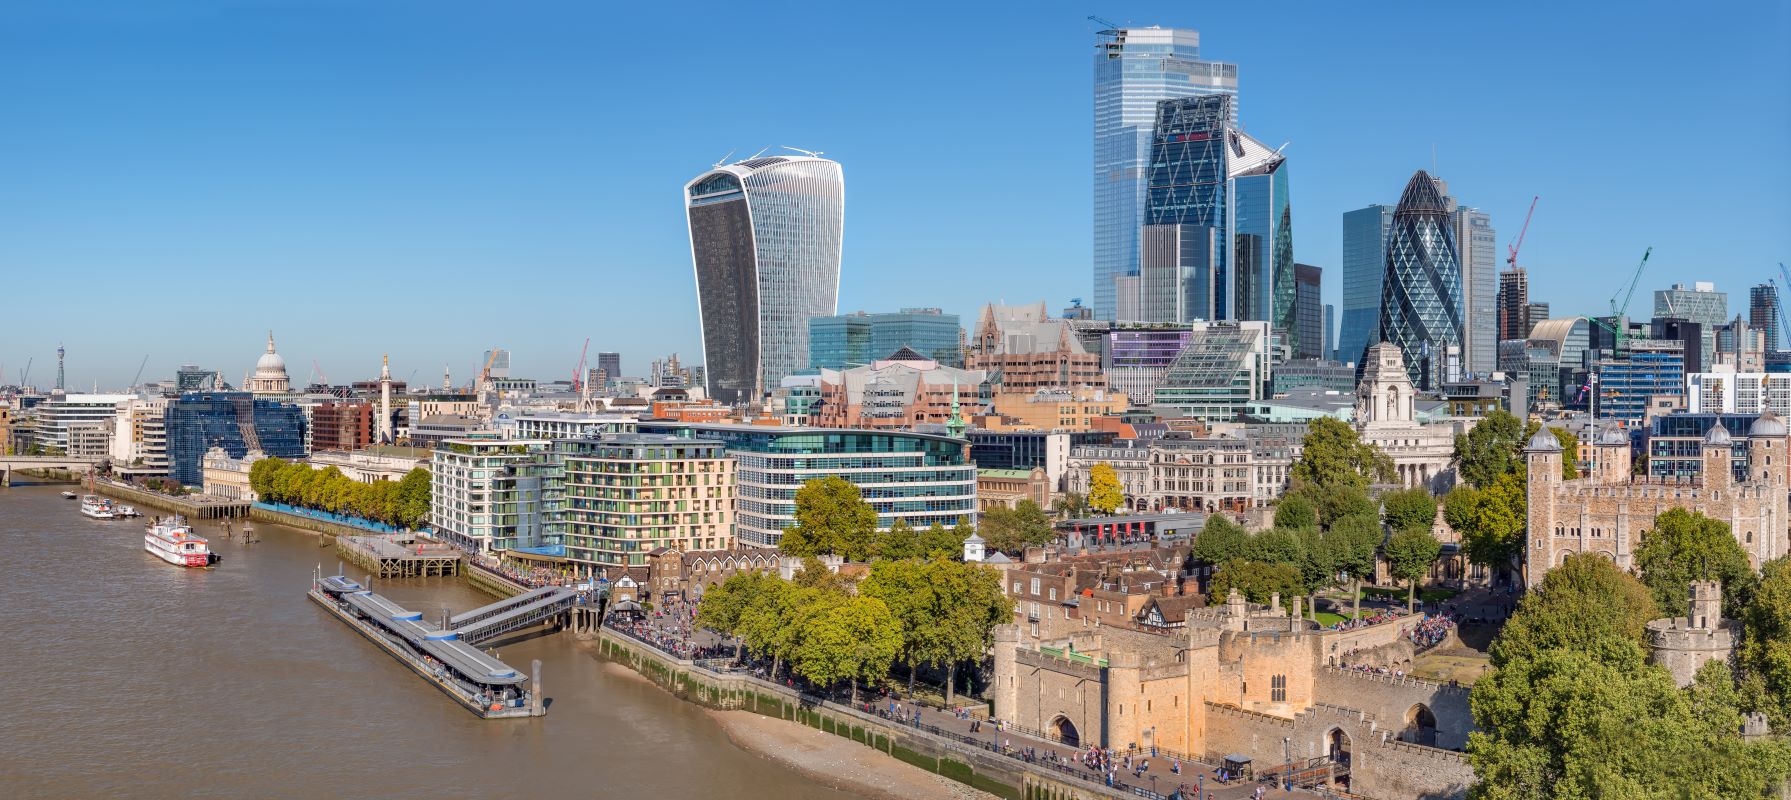 Aerial view of Thames river on a sunny day with the City Financial district skyscrapers and Tower of London